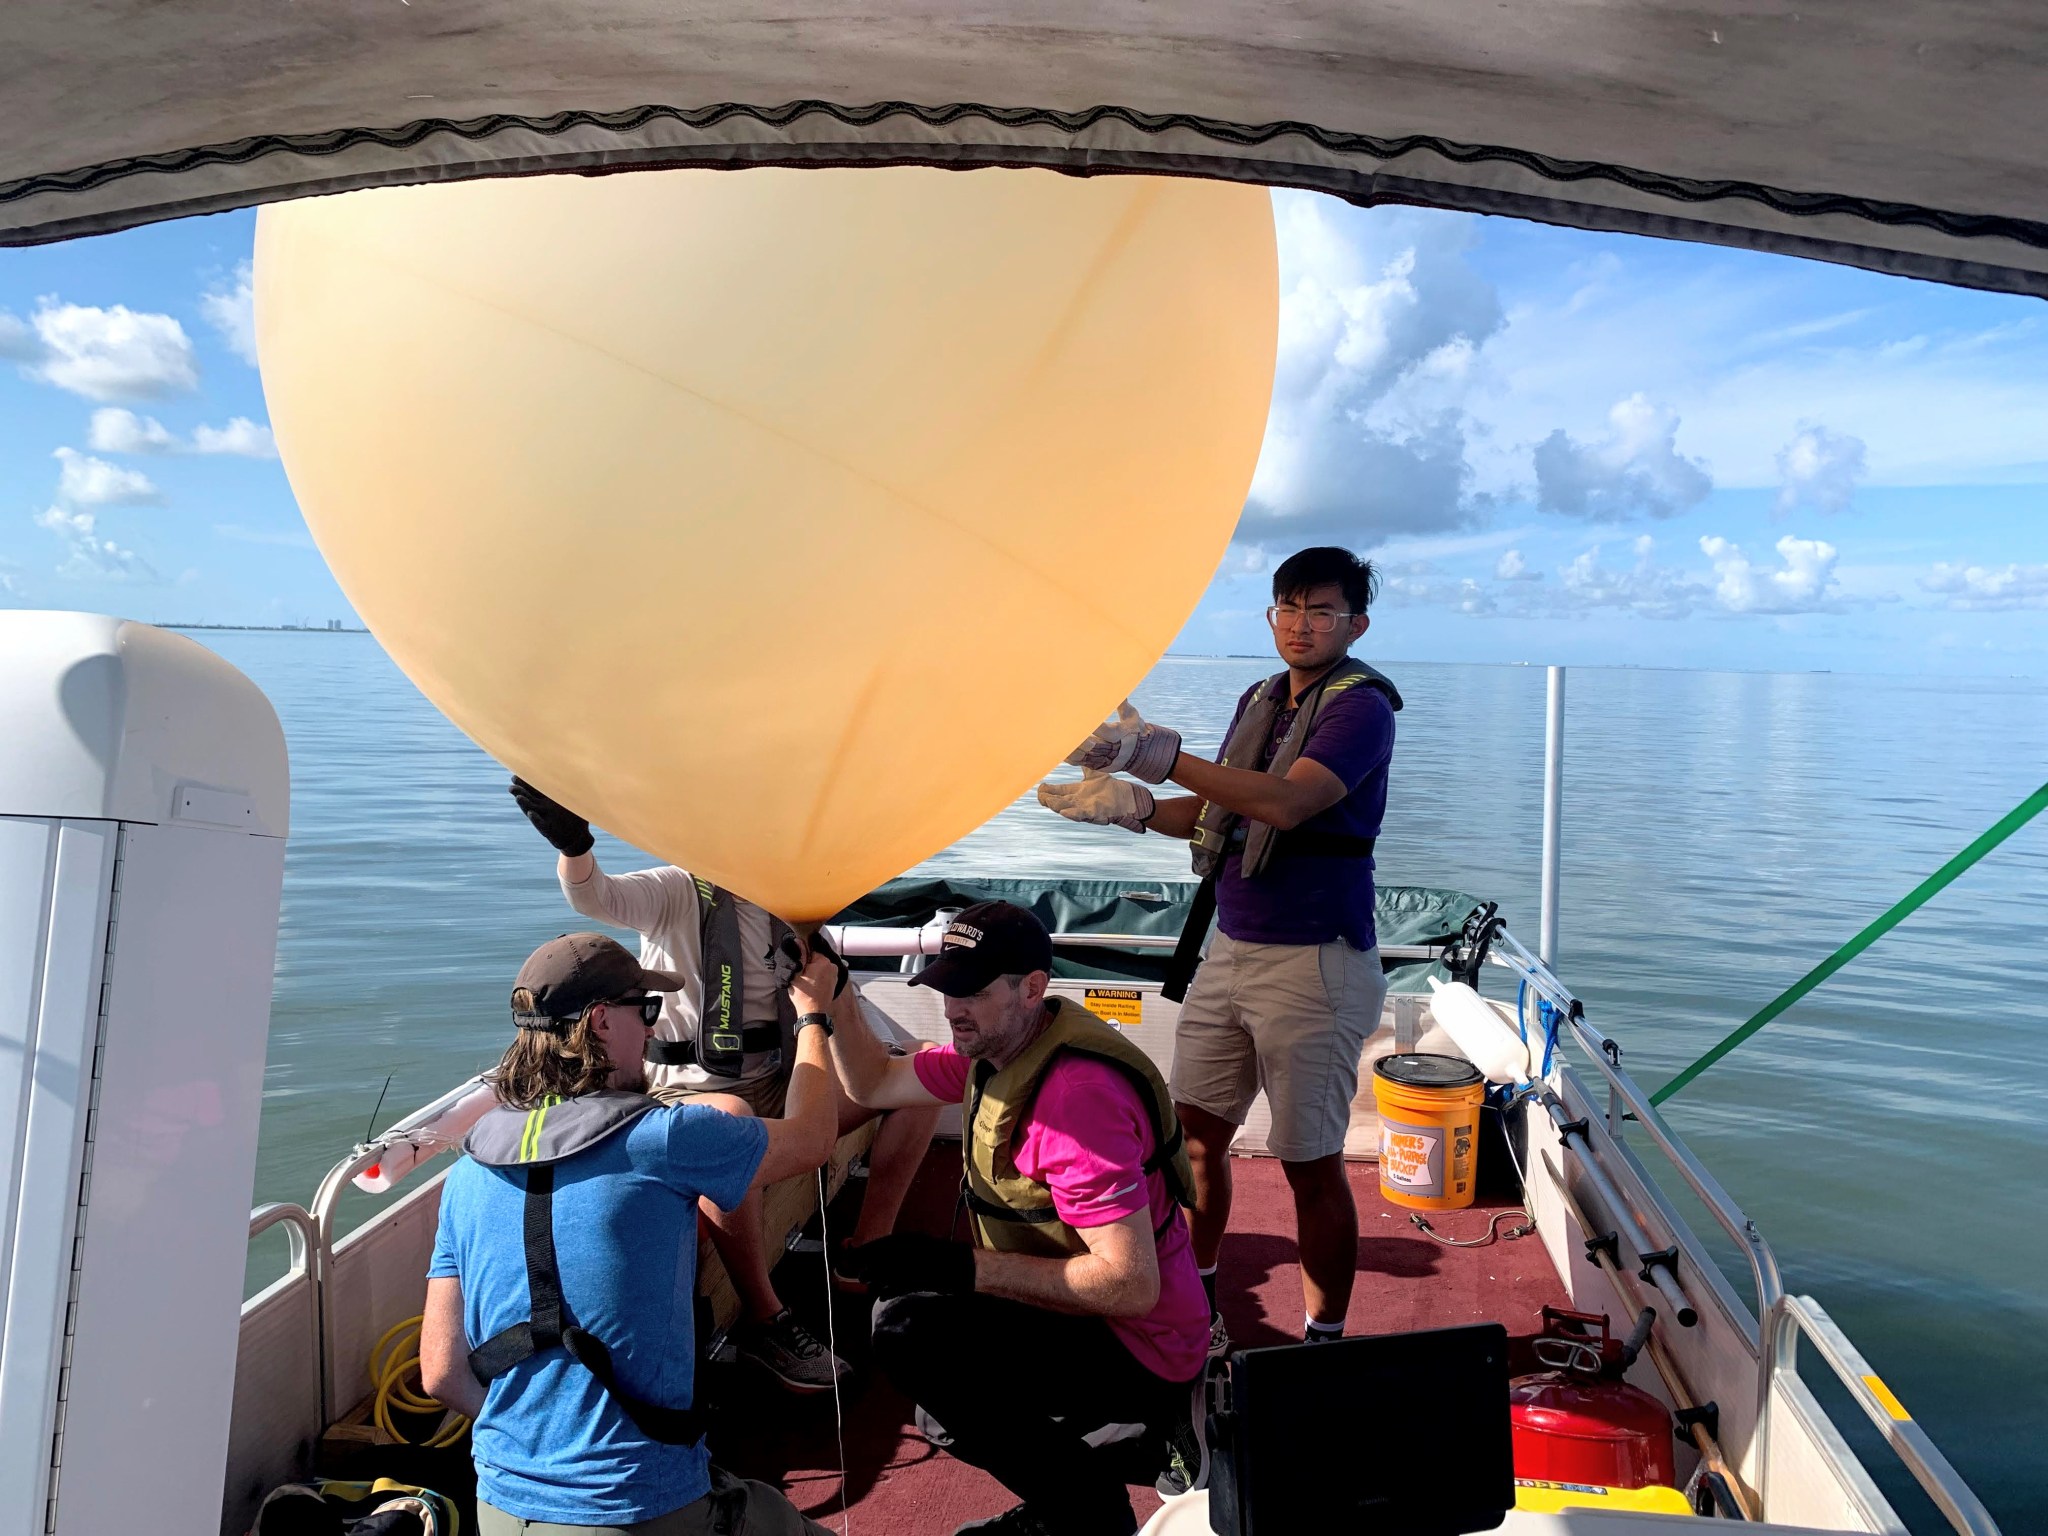 TRACER-AQ researchers launch a balloon sonde from a boat.